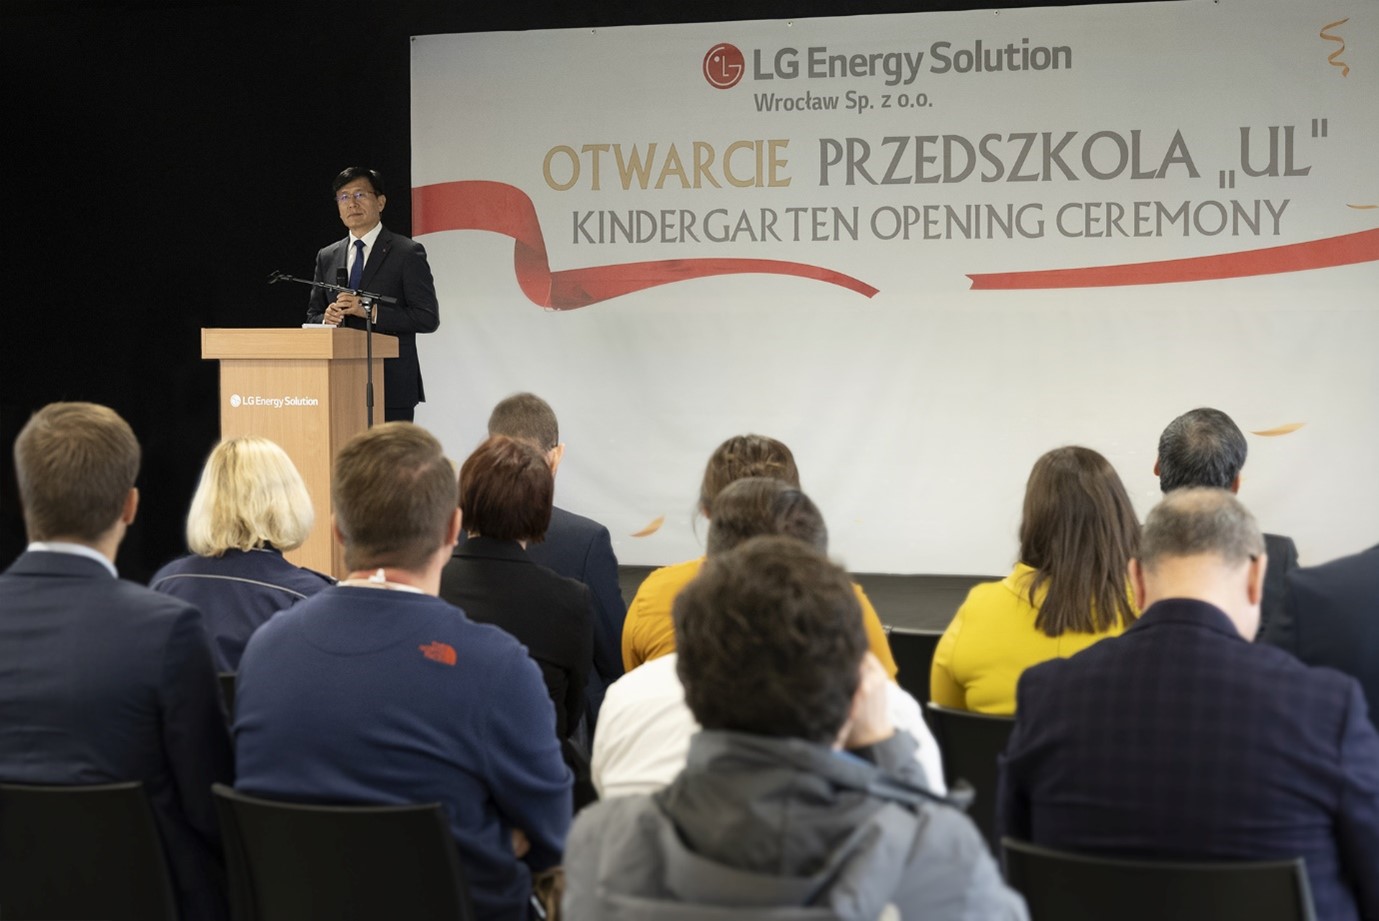 lg-energy-solution-wroclaw-opens-daycare-center-for-employees-community_3.jpg